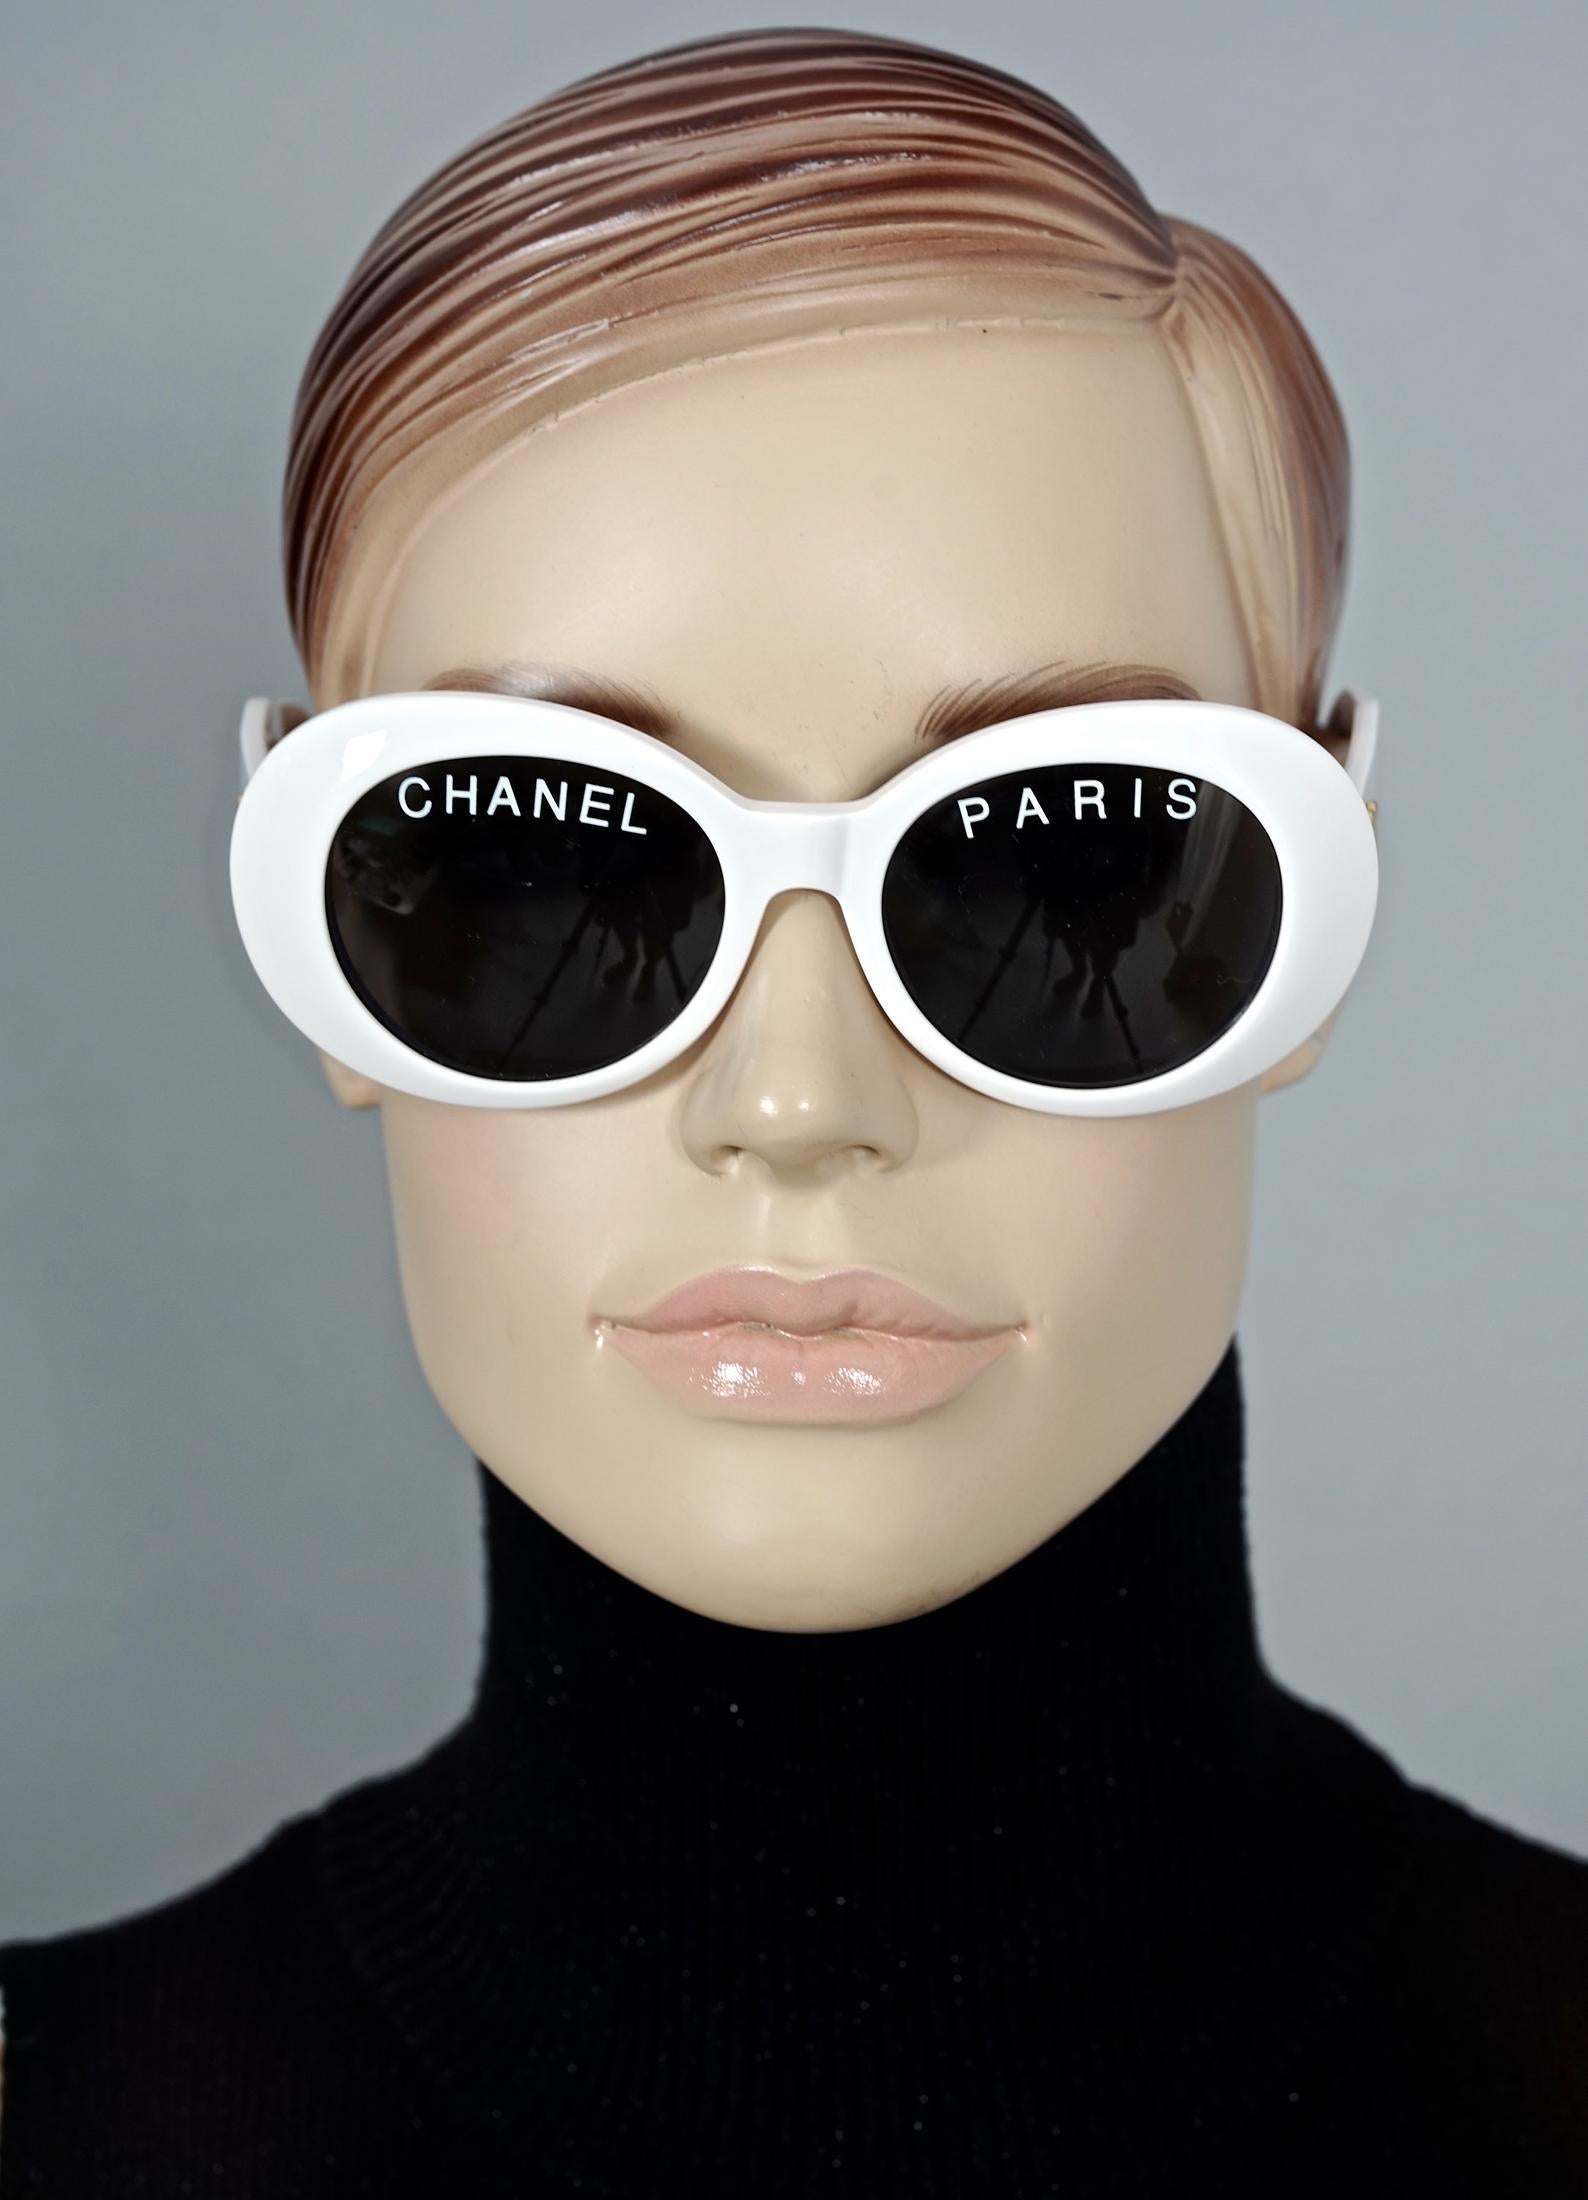 Vintage 1993 Iconic CHANEL PARIS Spelled White Sunglasses

Measurements:
Height: 2.12 inches (5.4 cm)
Frame Width: 5.51 inches (14 cm)
Temples: 5.11 inches (13 cm)

As seen on Pharrell Williams.
From CHANEL Spring/ Summer 1993